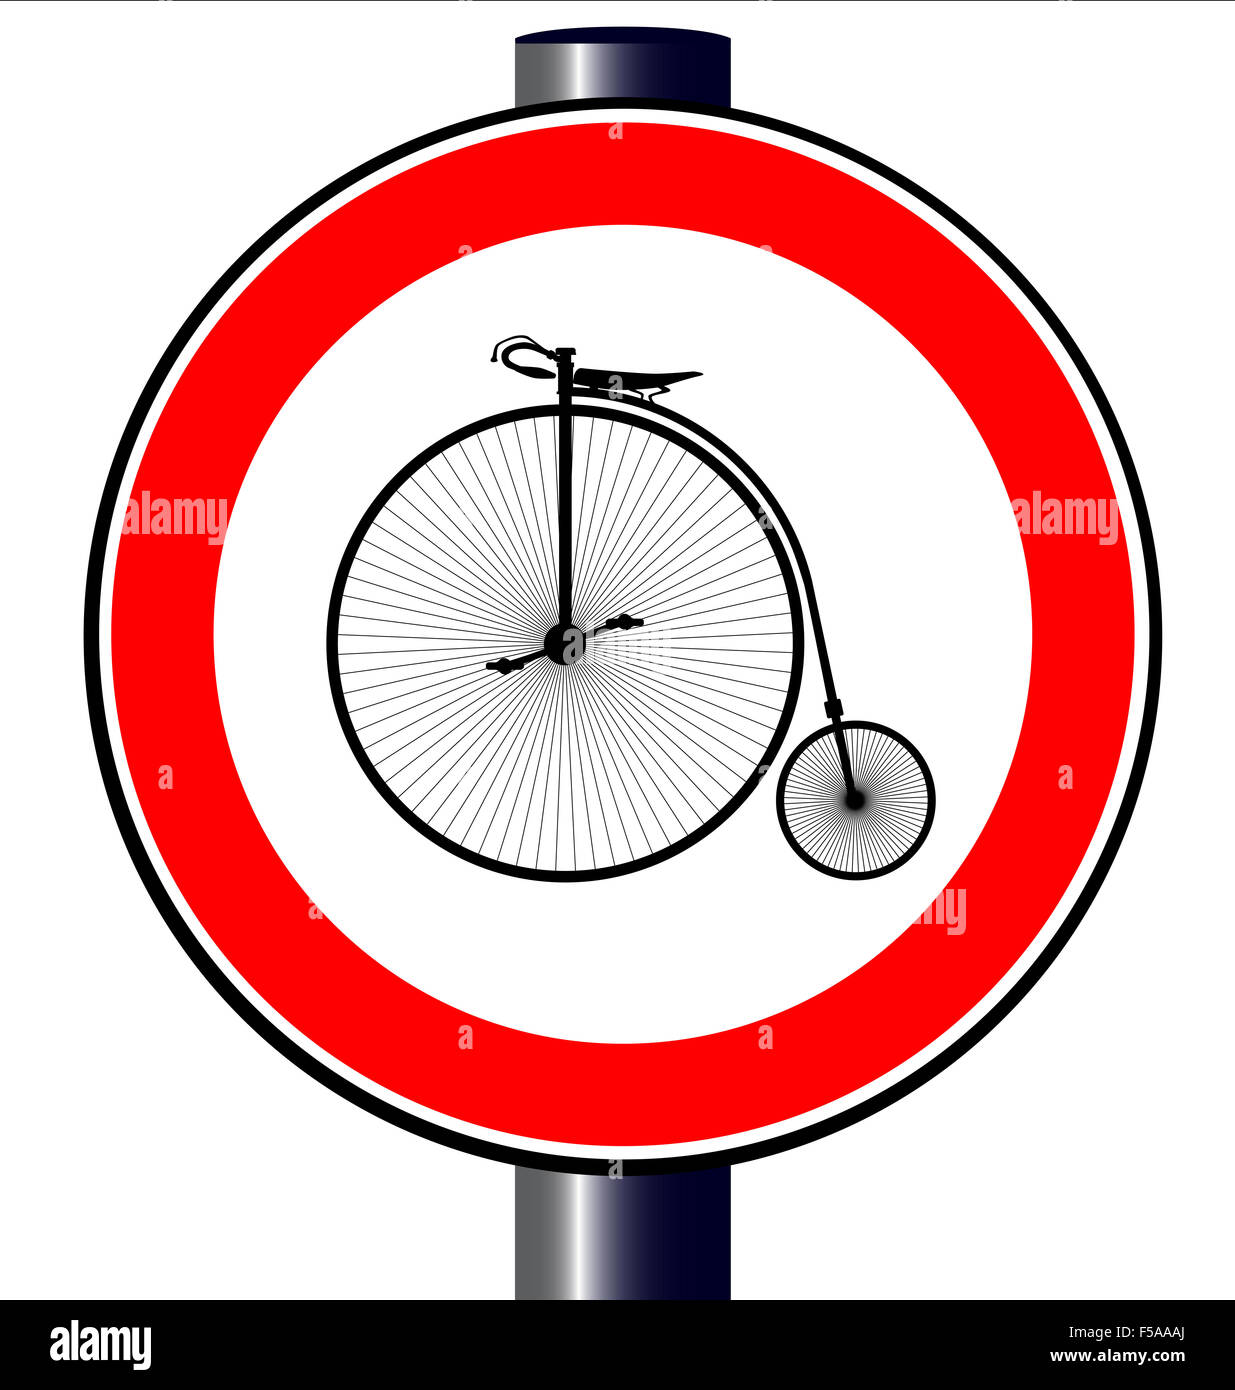 A large round red traffic sign displaying a penny farthing bicycle Stock Photo